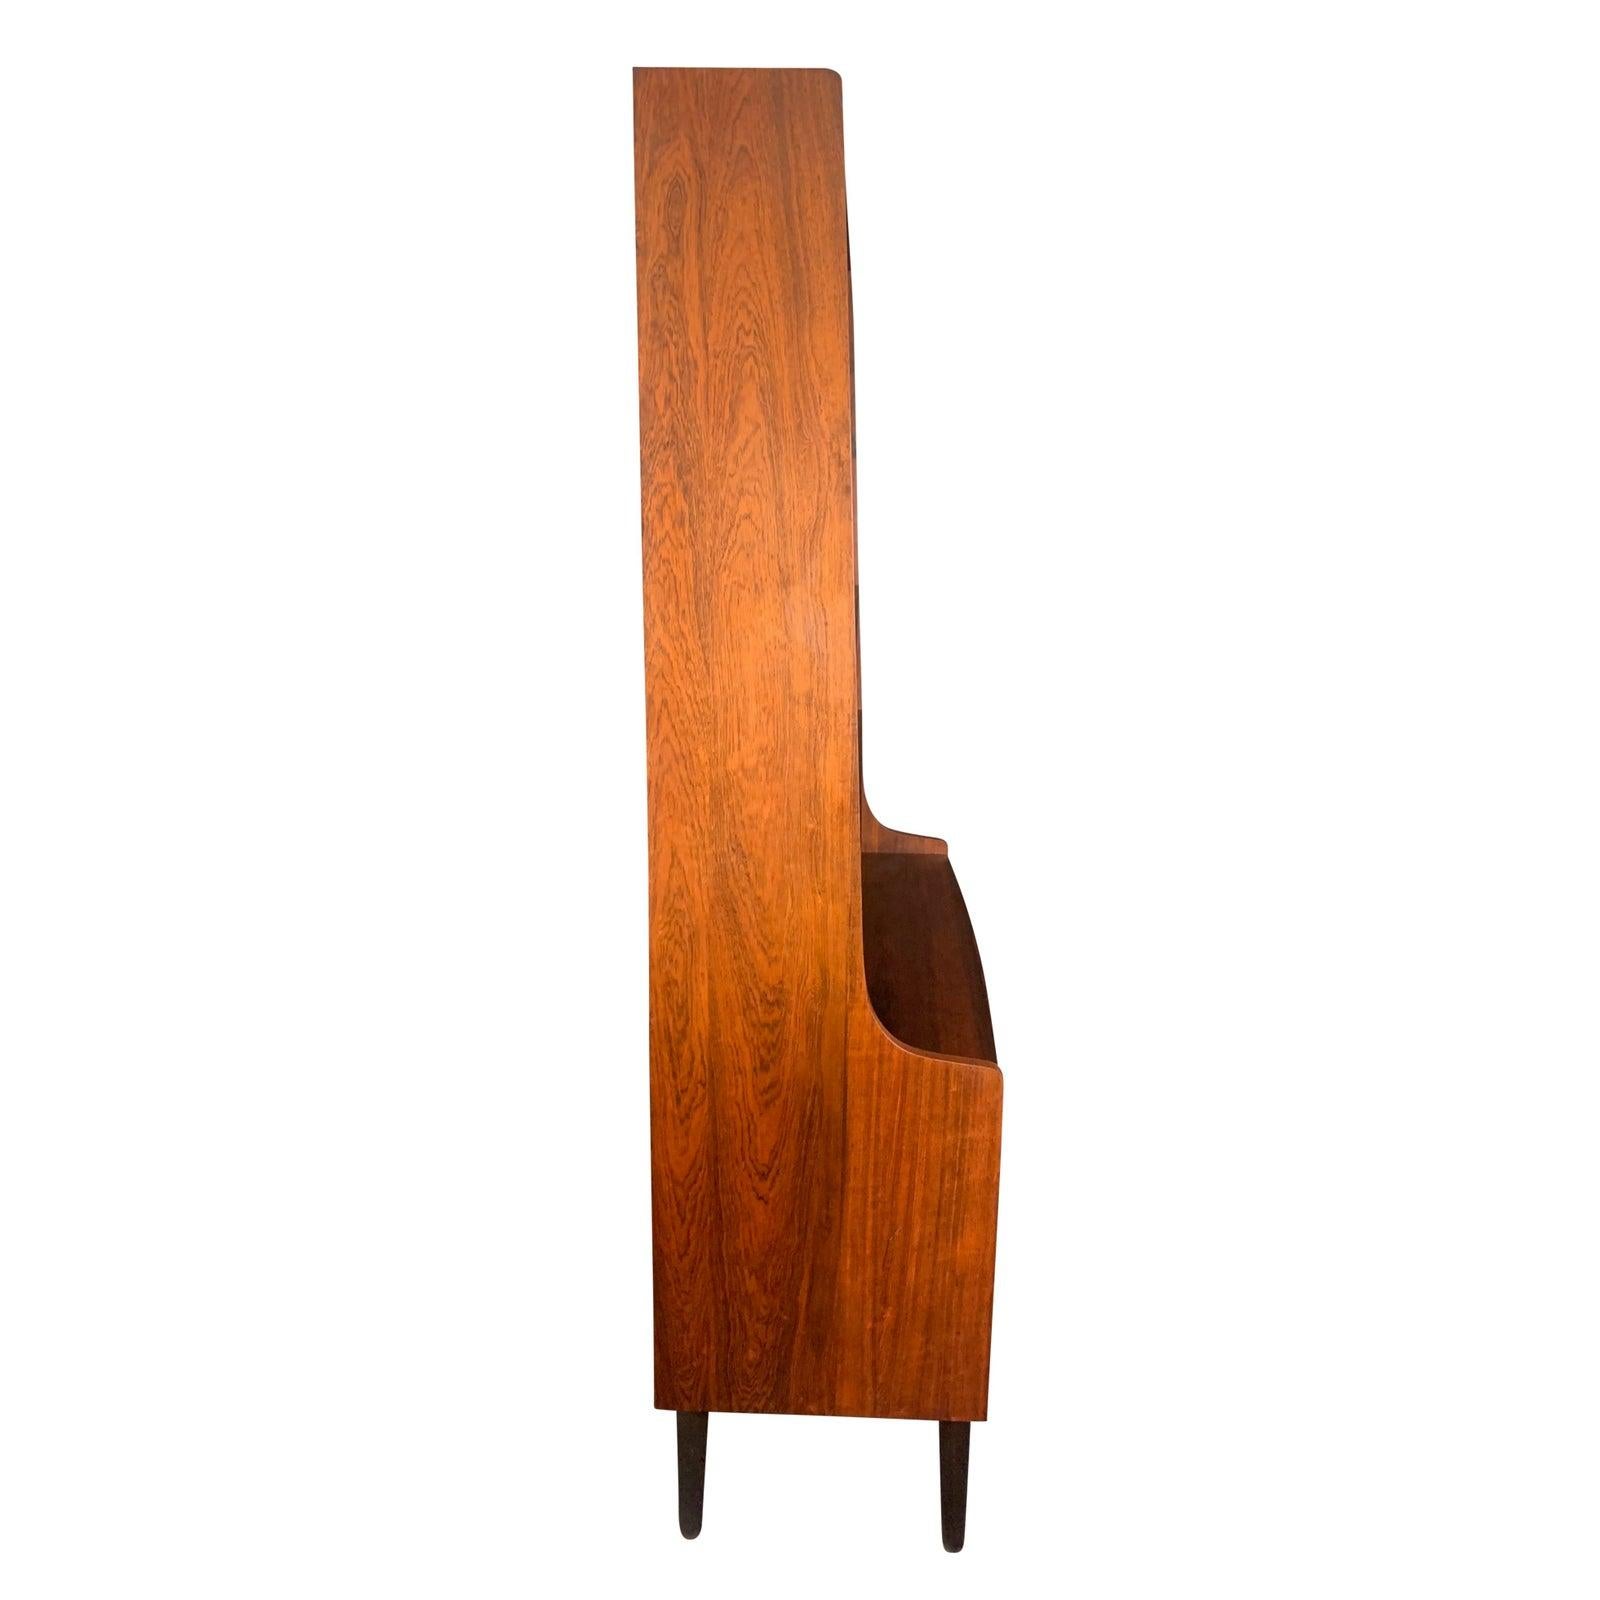 Mid-20th Century Vintage Danish Mid-Century Modern Rosewood Bookcase by Johannes Sorth For Sale